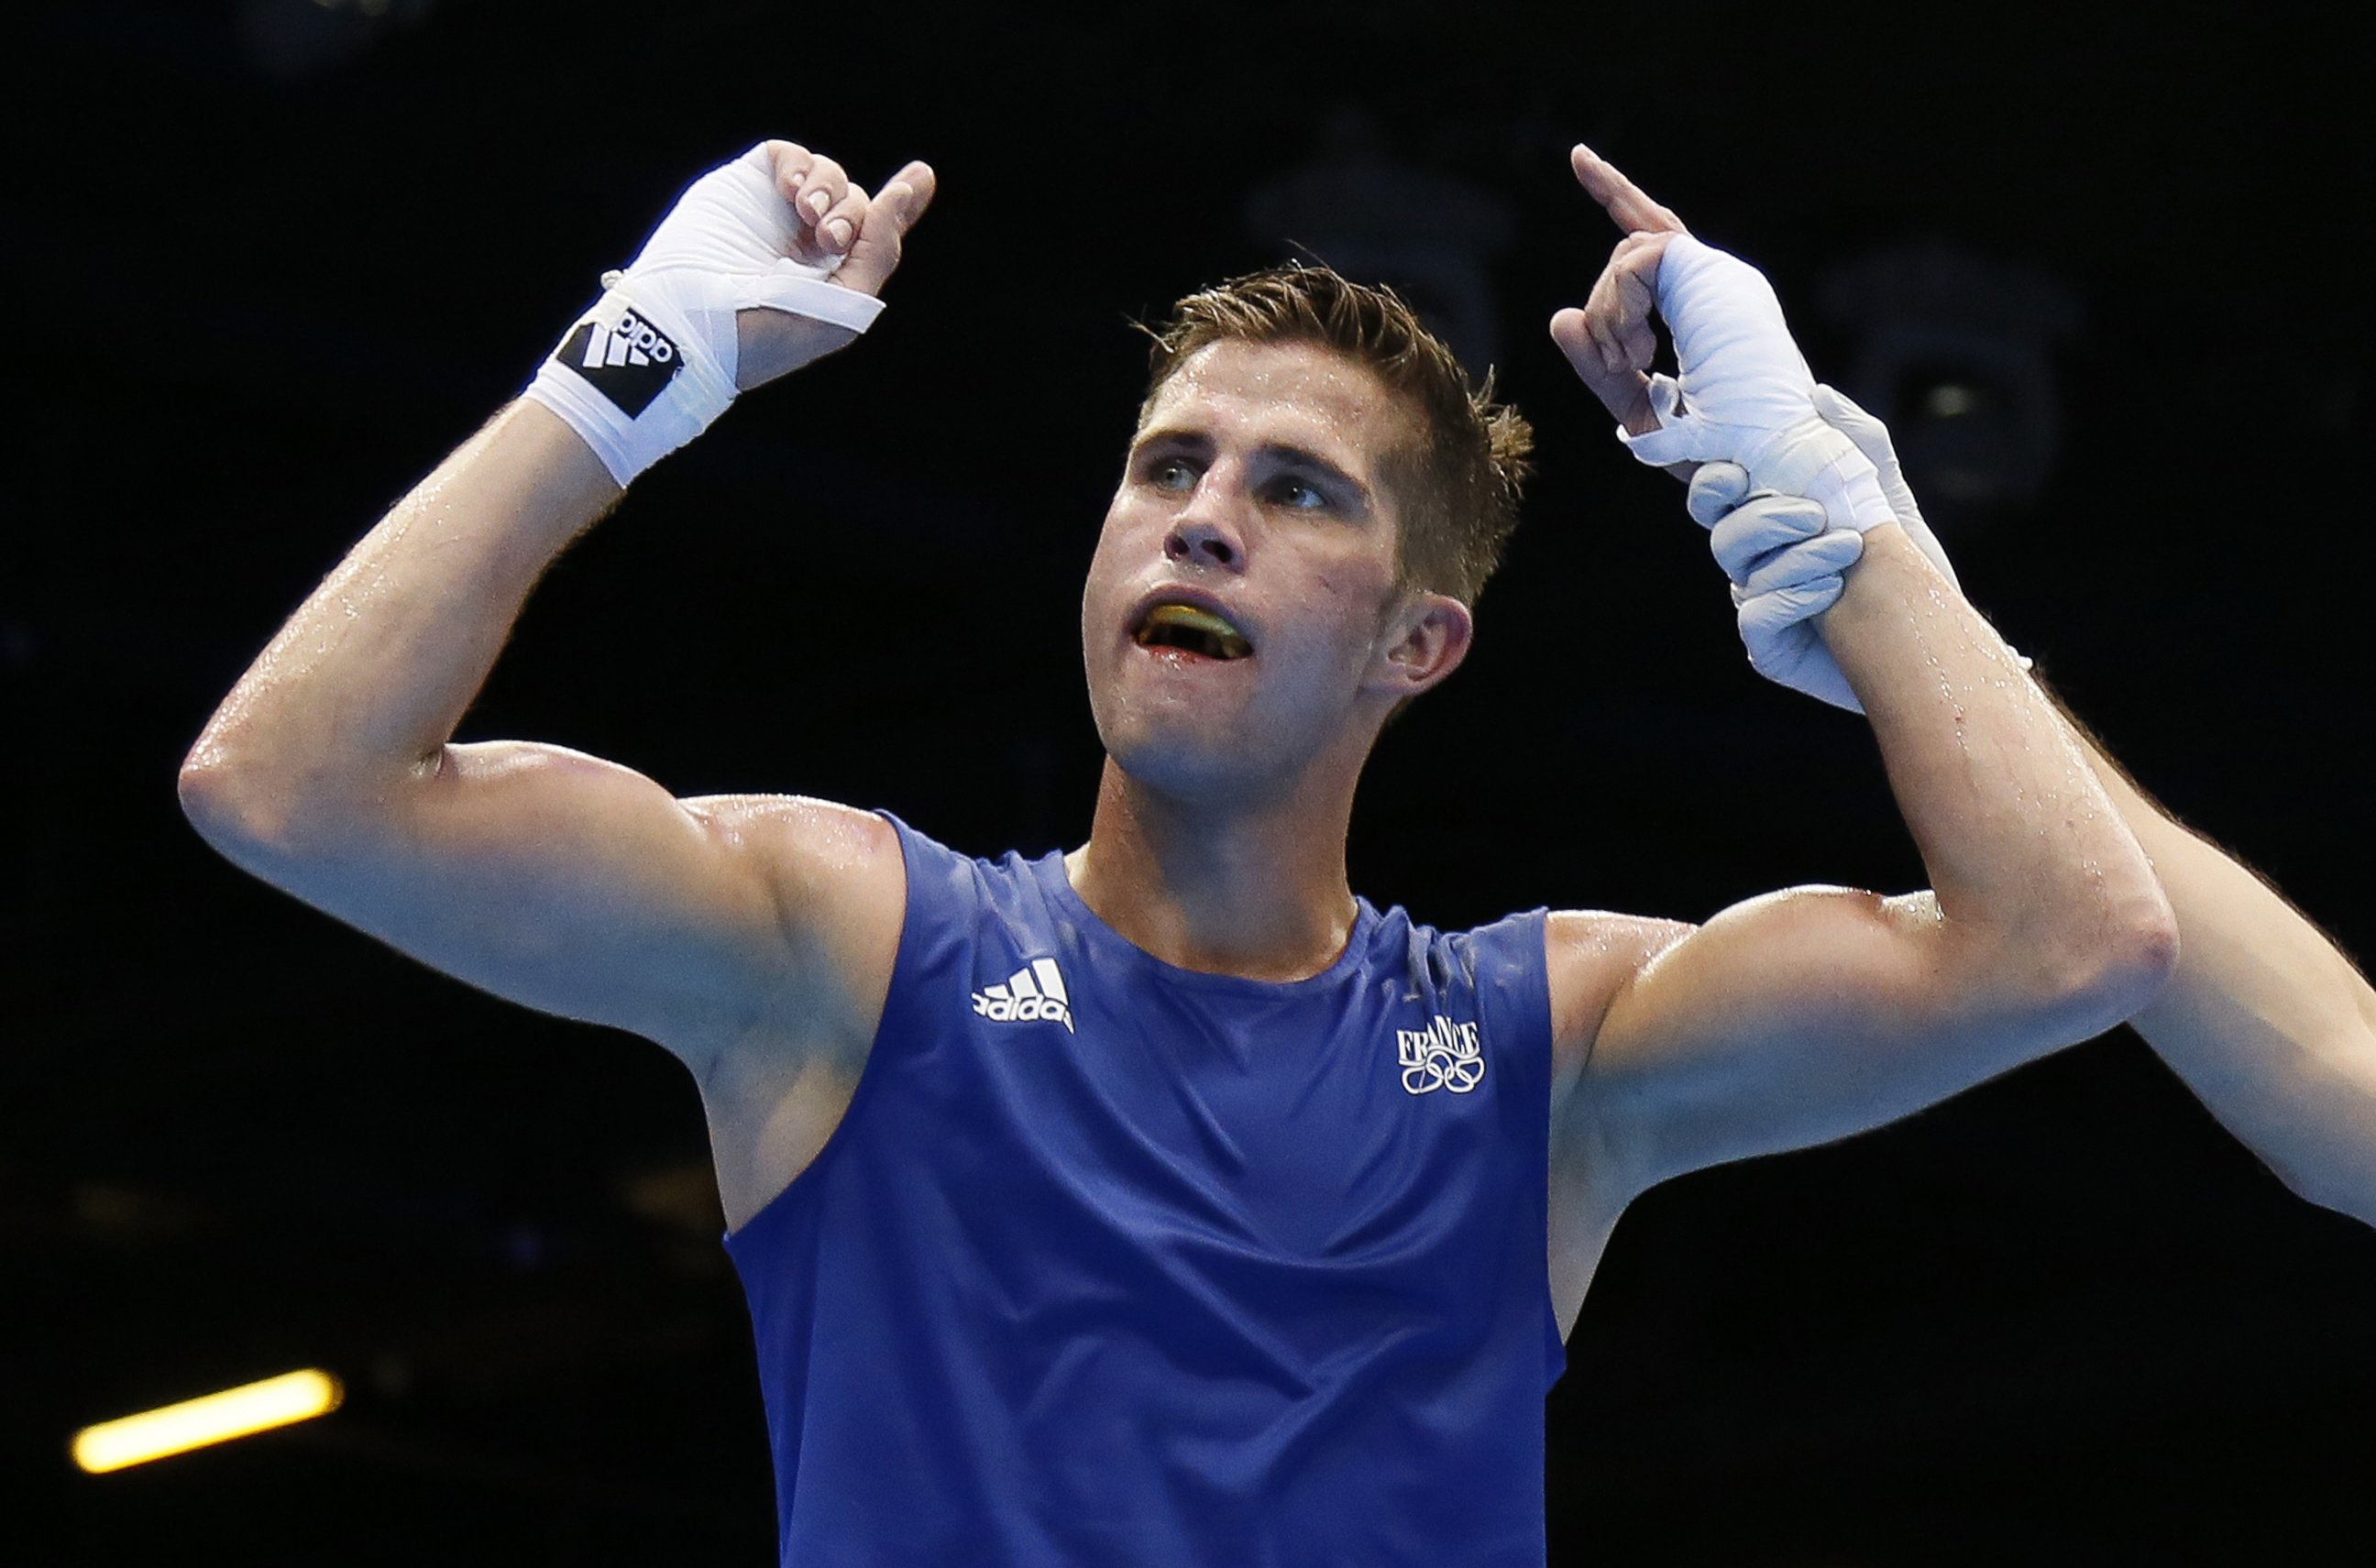 PHOTO: Alexis Vastine of France is declared winner over Tuvshinbat Byamba of Mongolia in their round of 16 Welterwight match of the London 2012 Olympic Games at the ExCel Arena on August 3, 2012 in London.